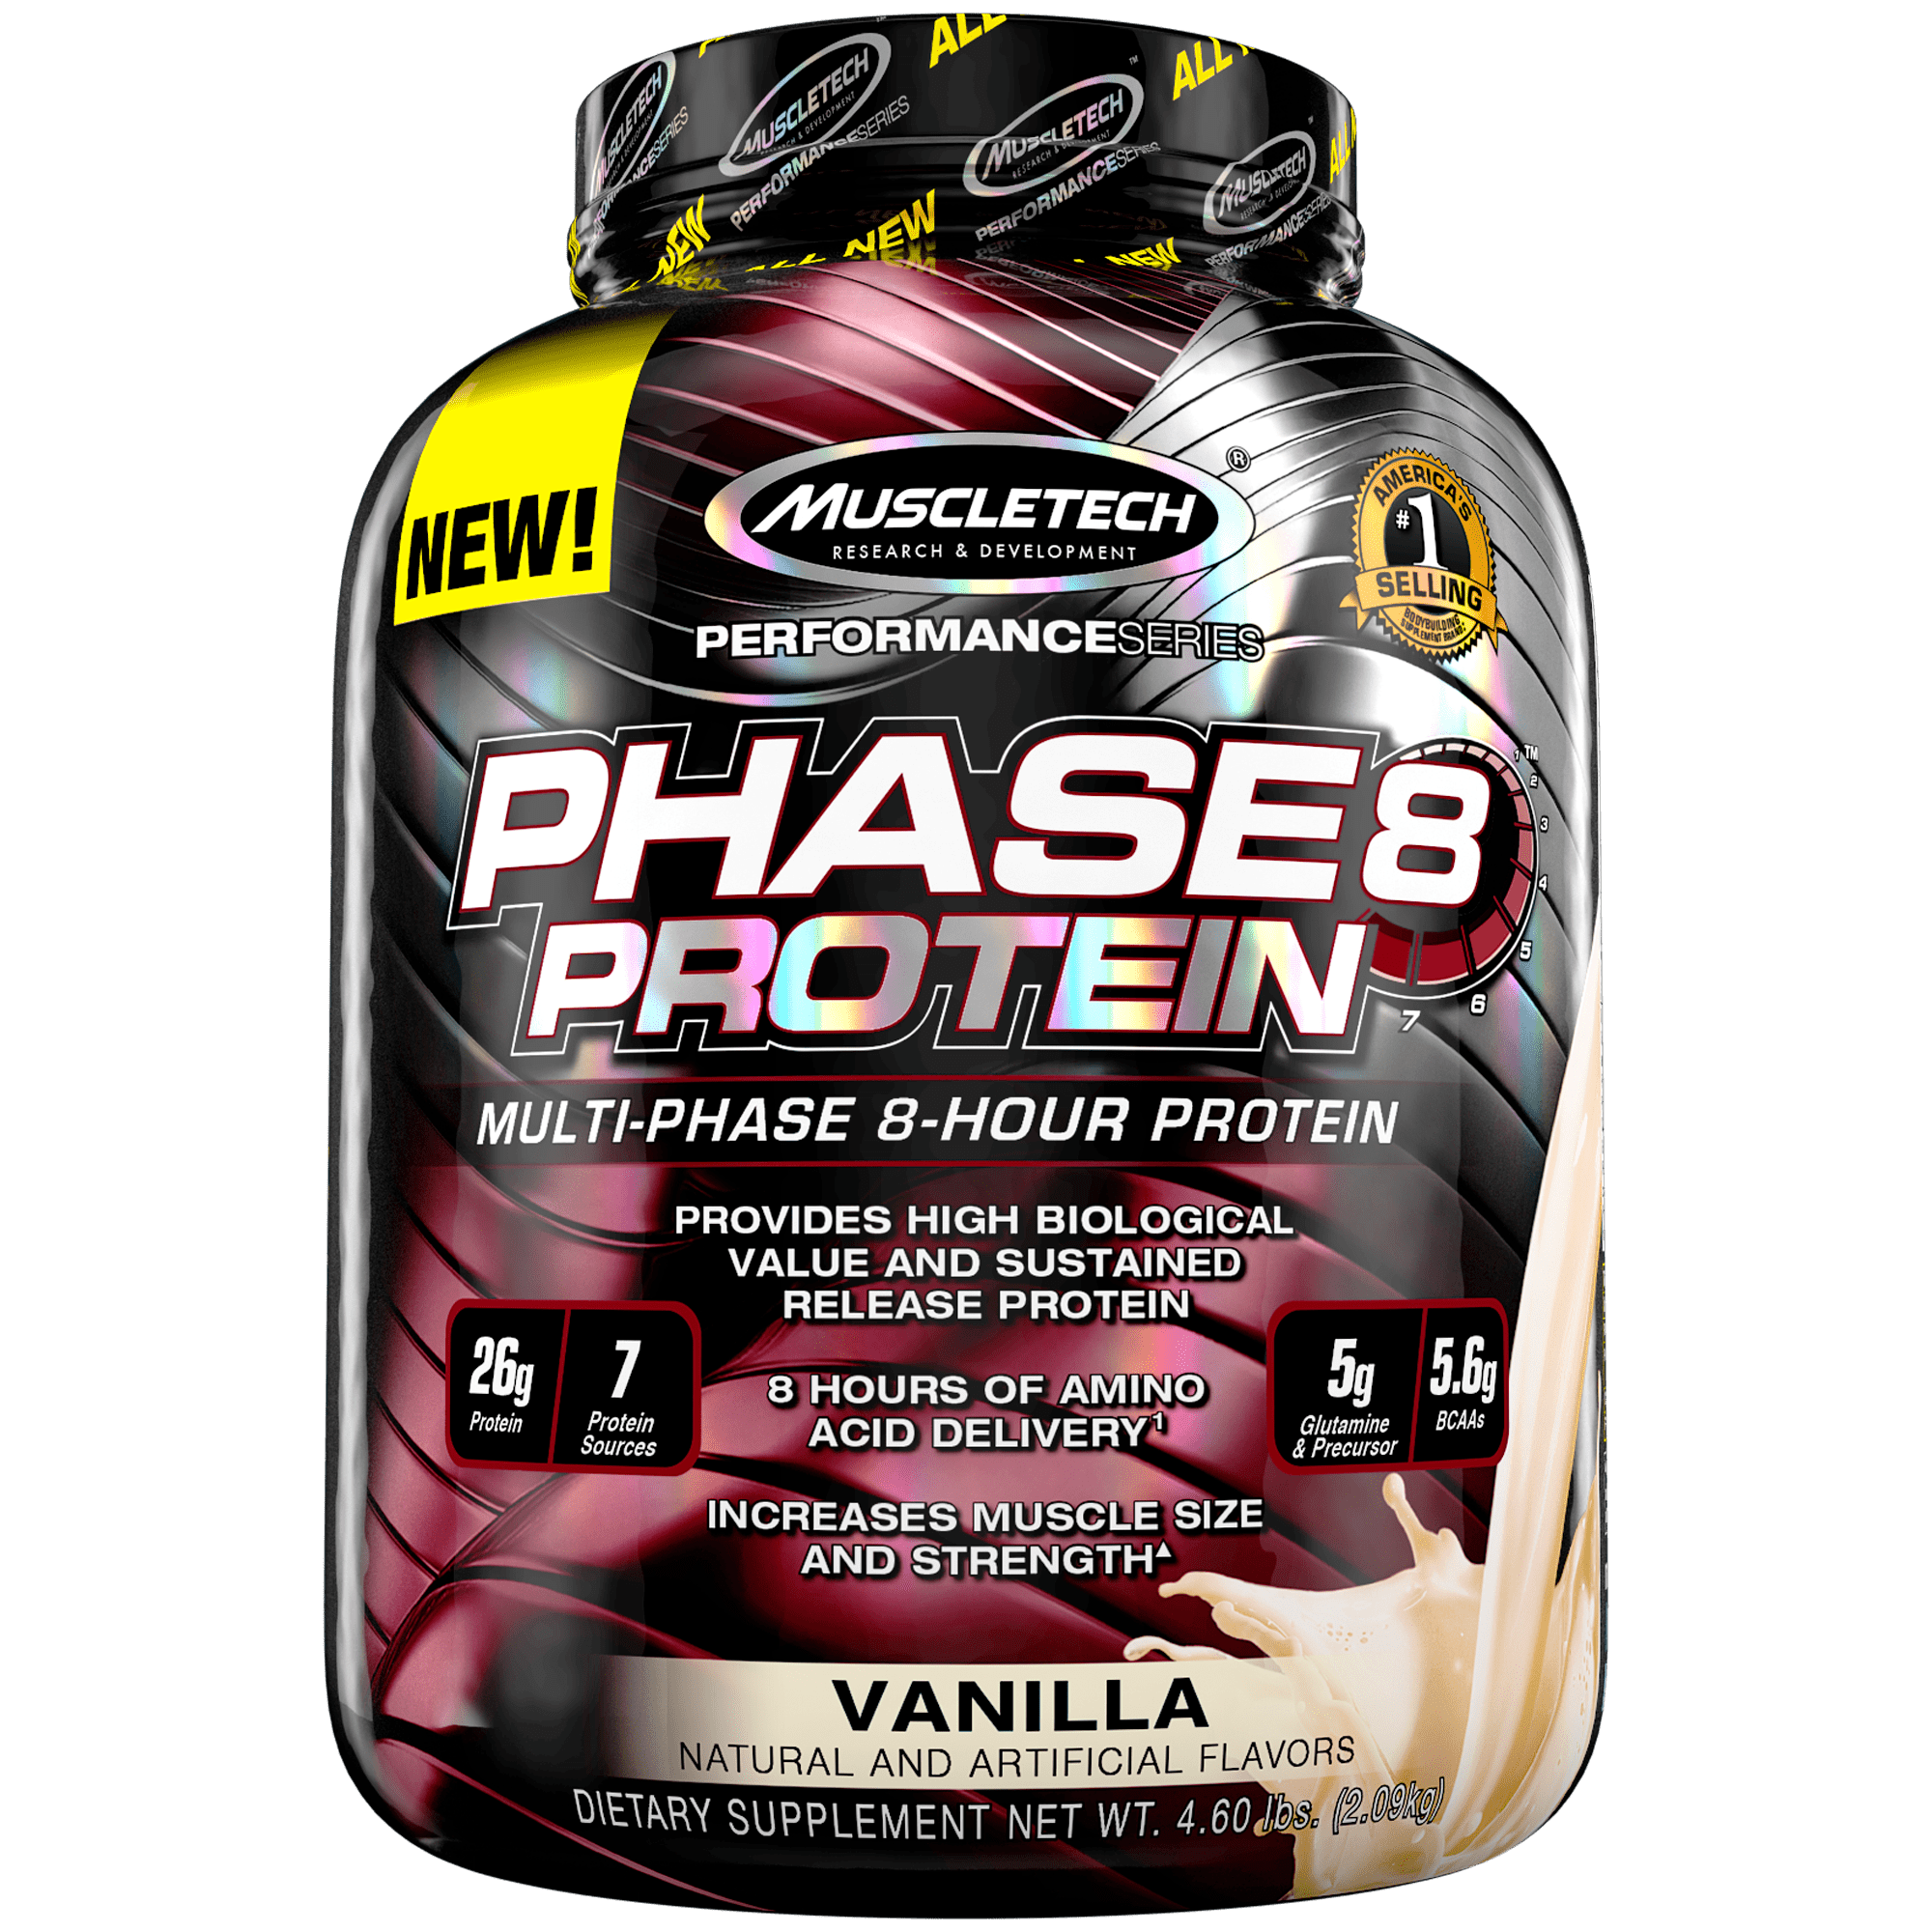 GNC AMP Sustained Protein Blend - Chocolate Milkshake, 28 Servings,  High-Quality 